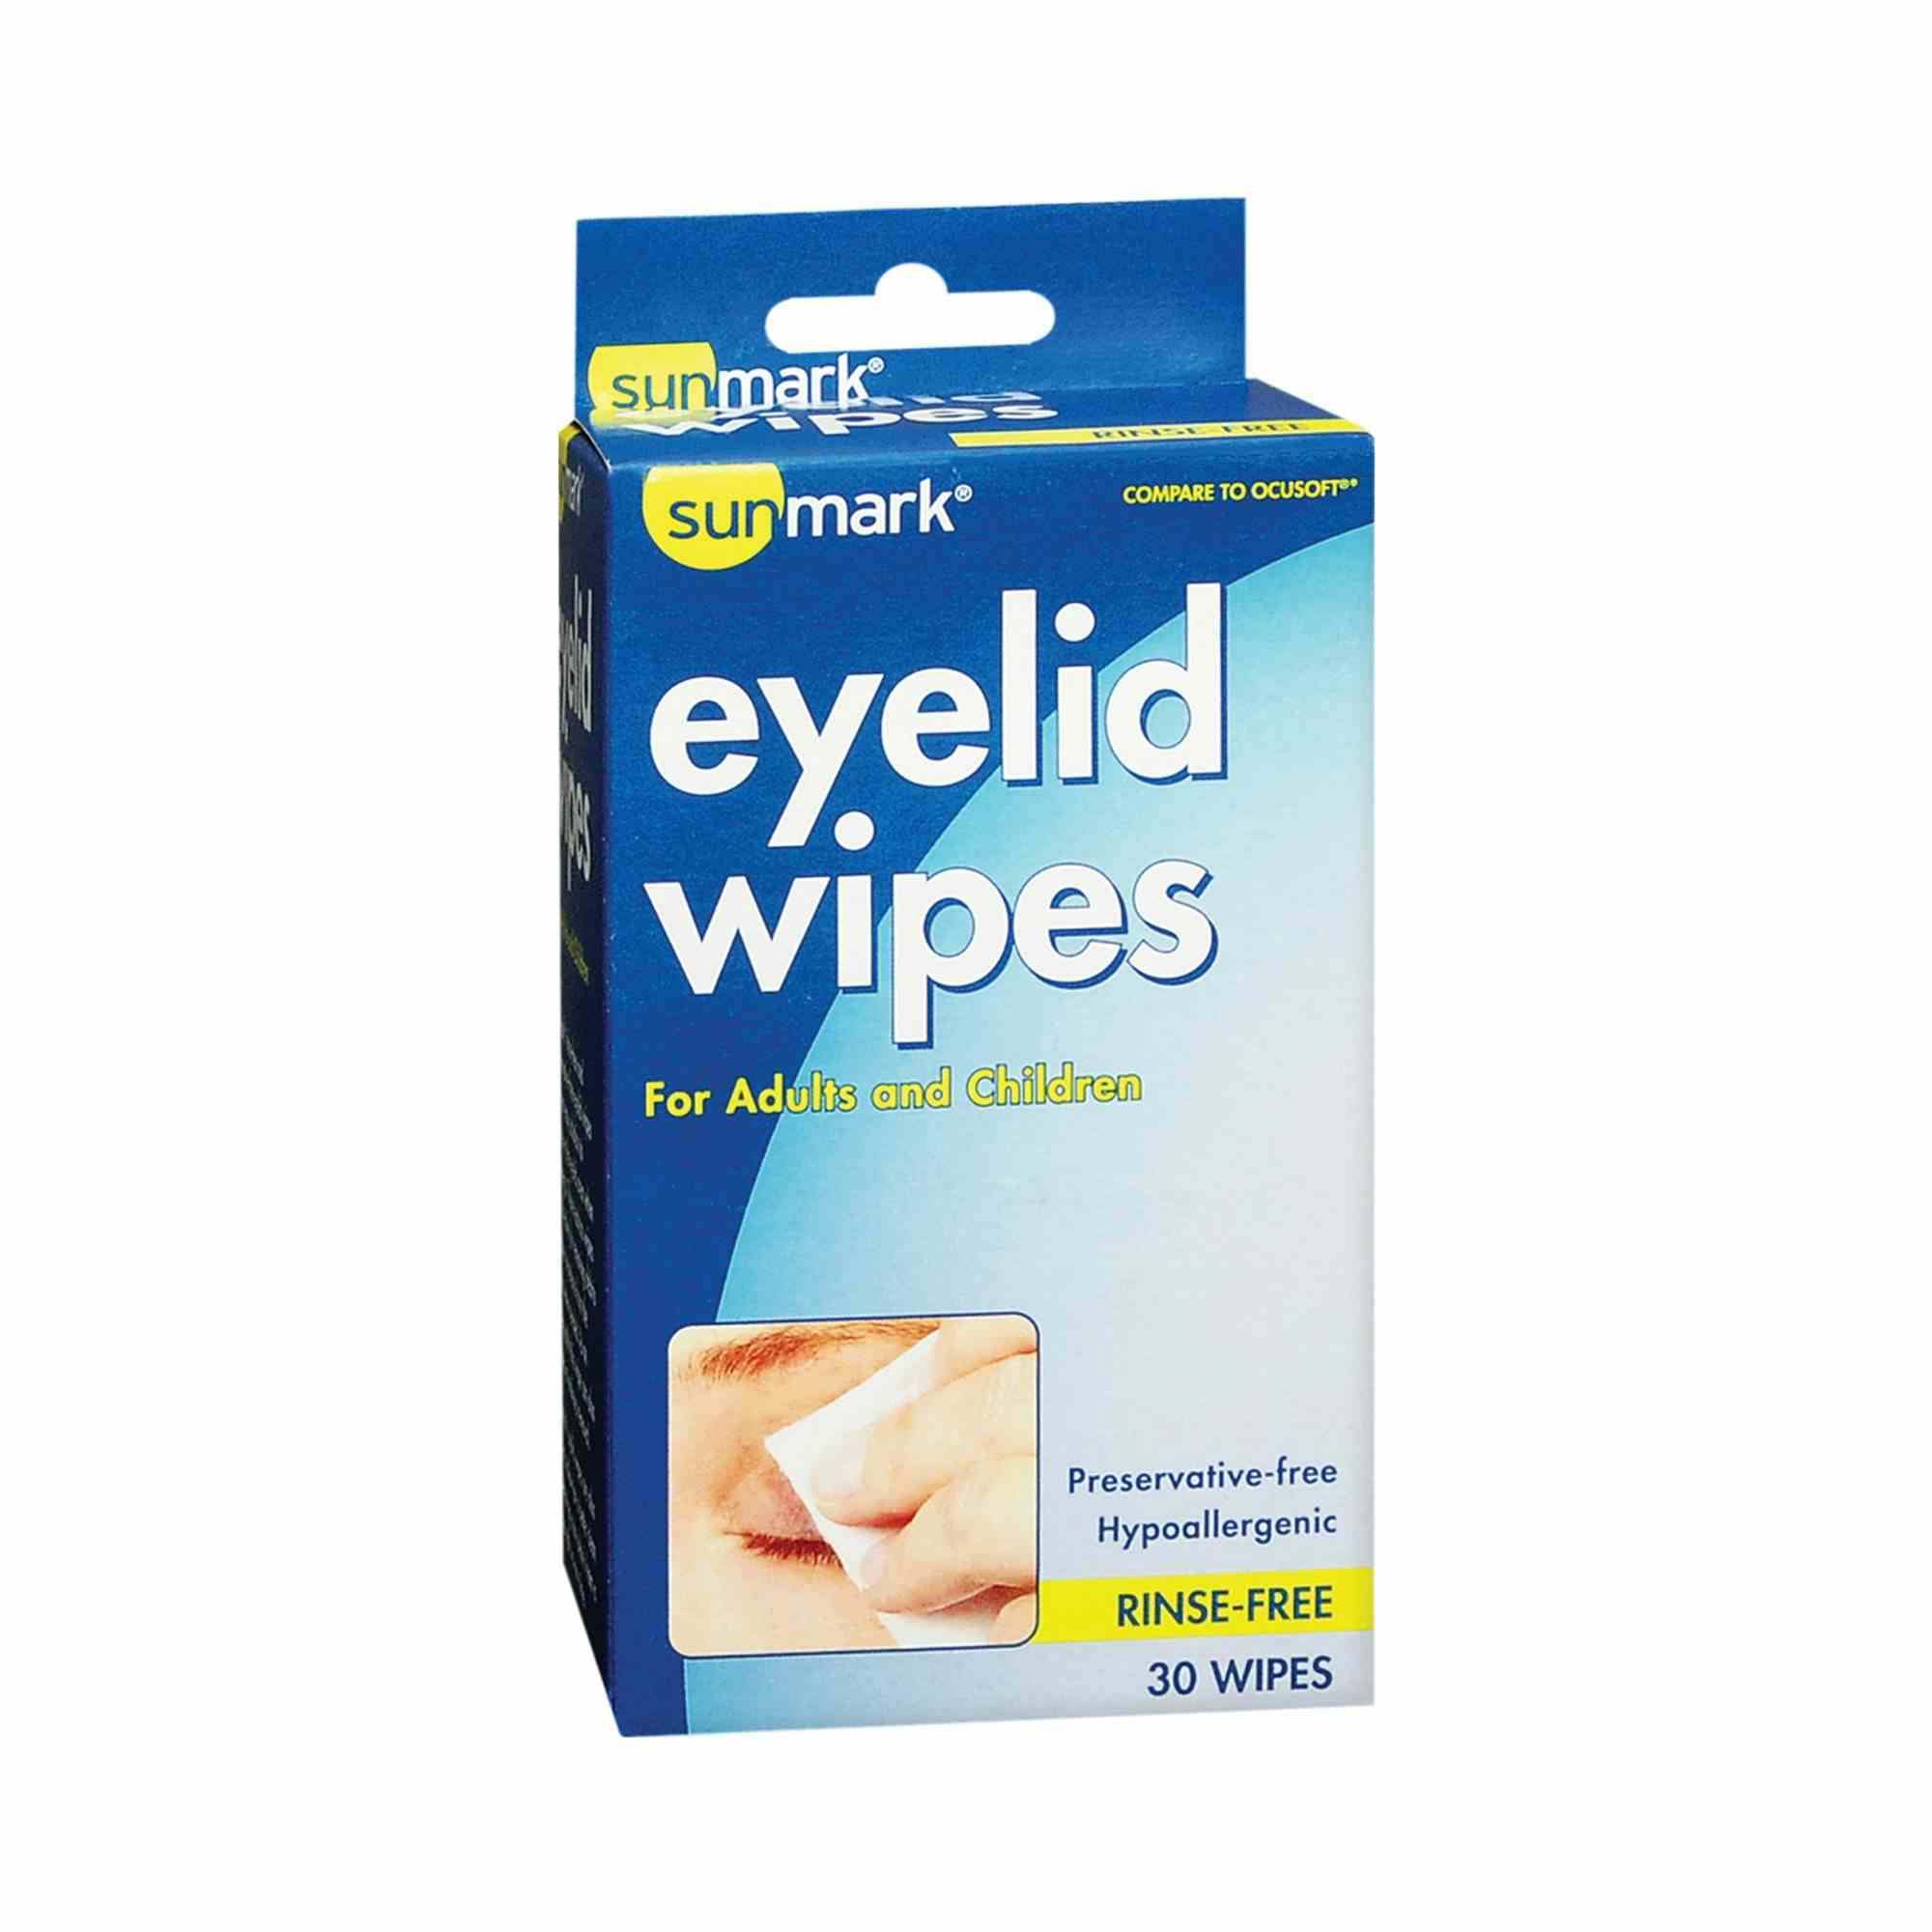 sunmark Eyelid Wipes for Adults and Children, 01093932444, Box of 30